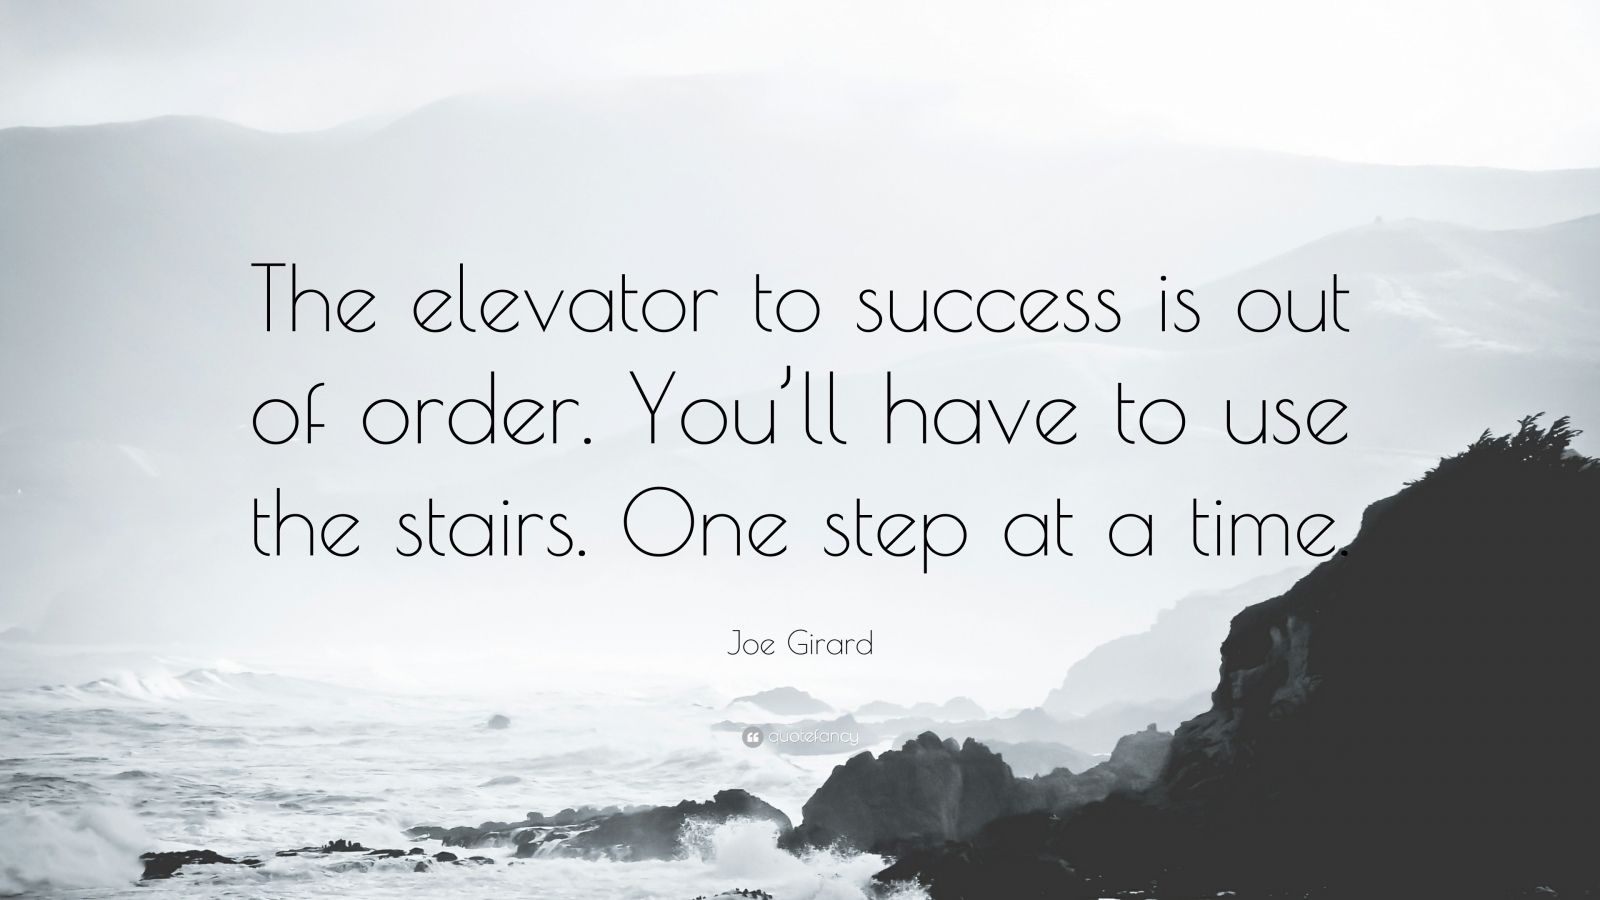 Joe Girard Quote: “The elevator to success is out of order. You’ll have